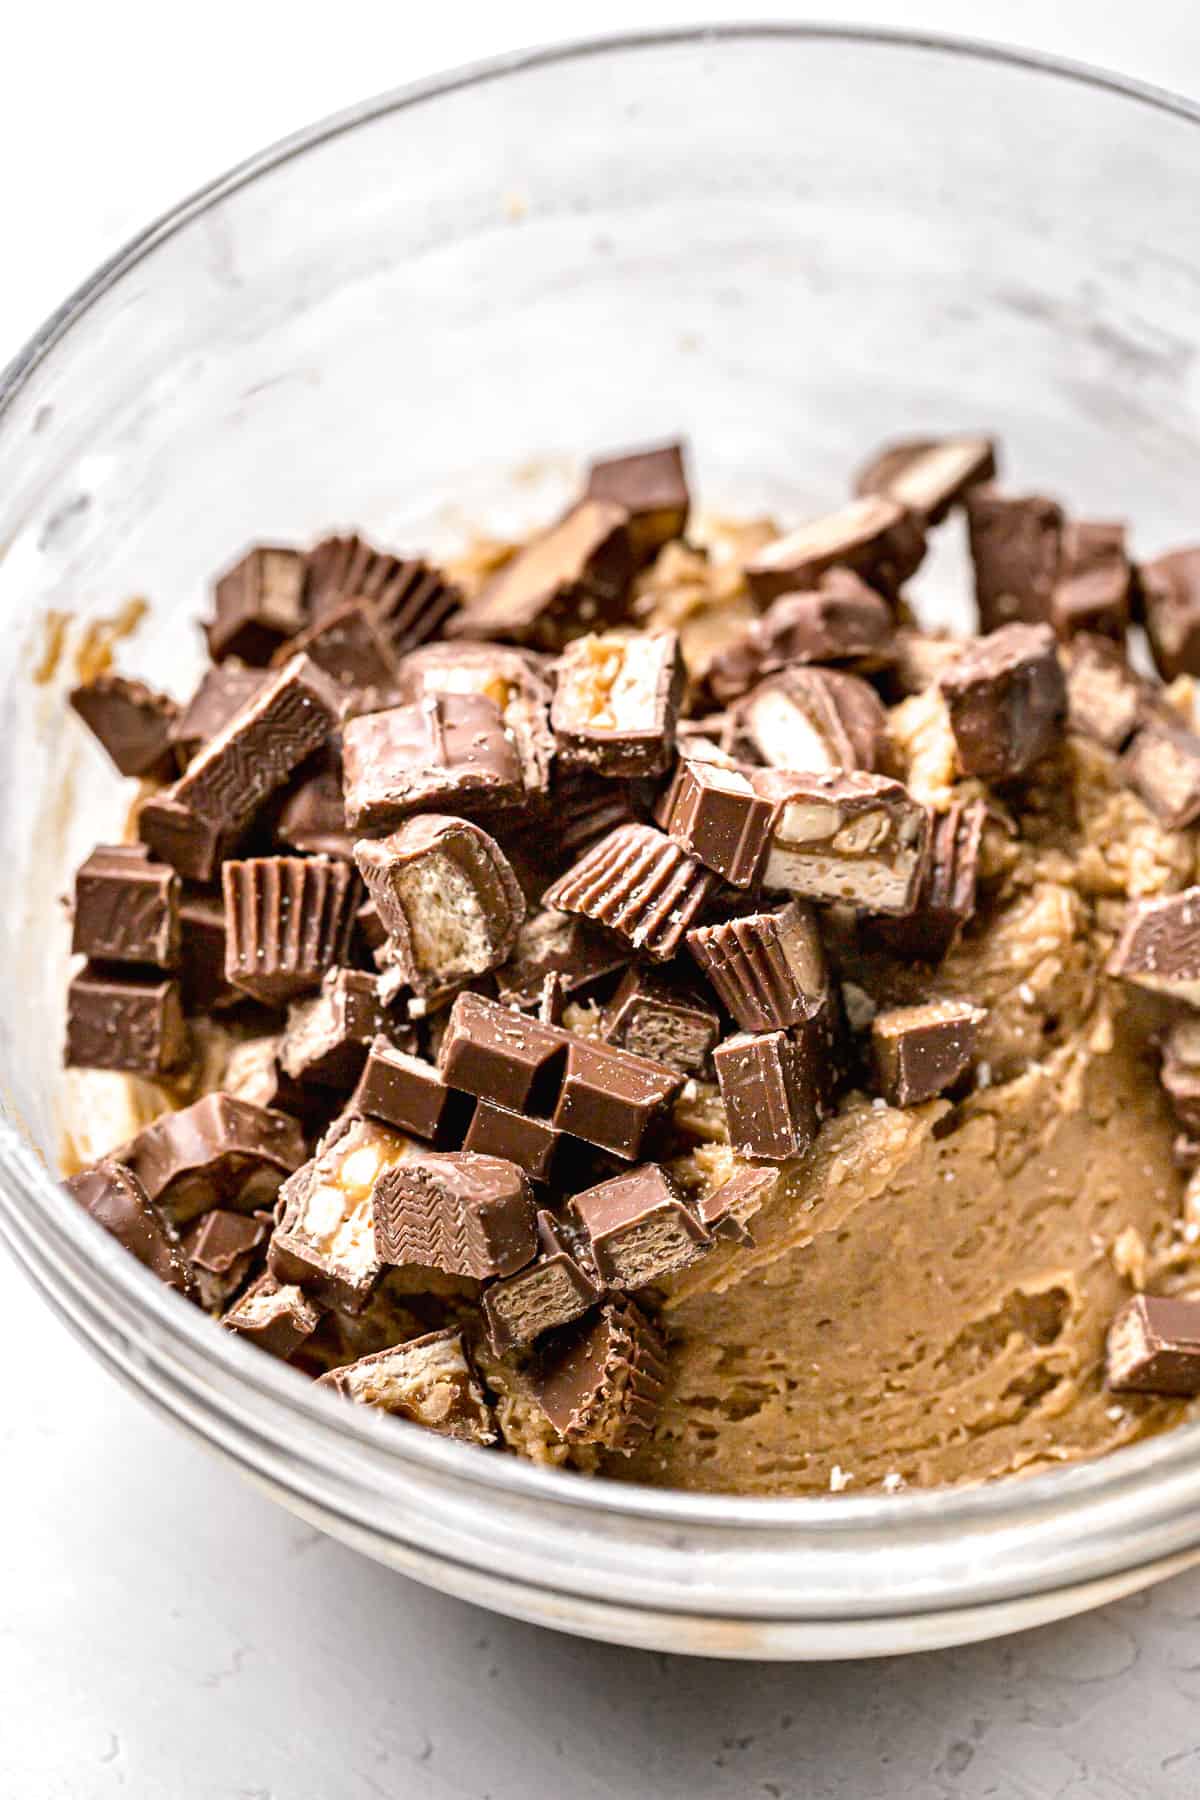 blondie batter and candy bars in glass mixing bowl.